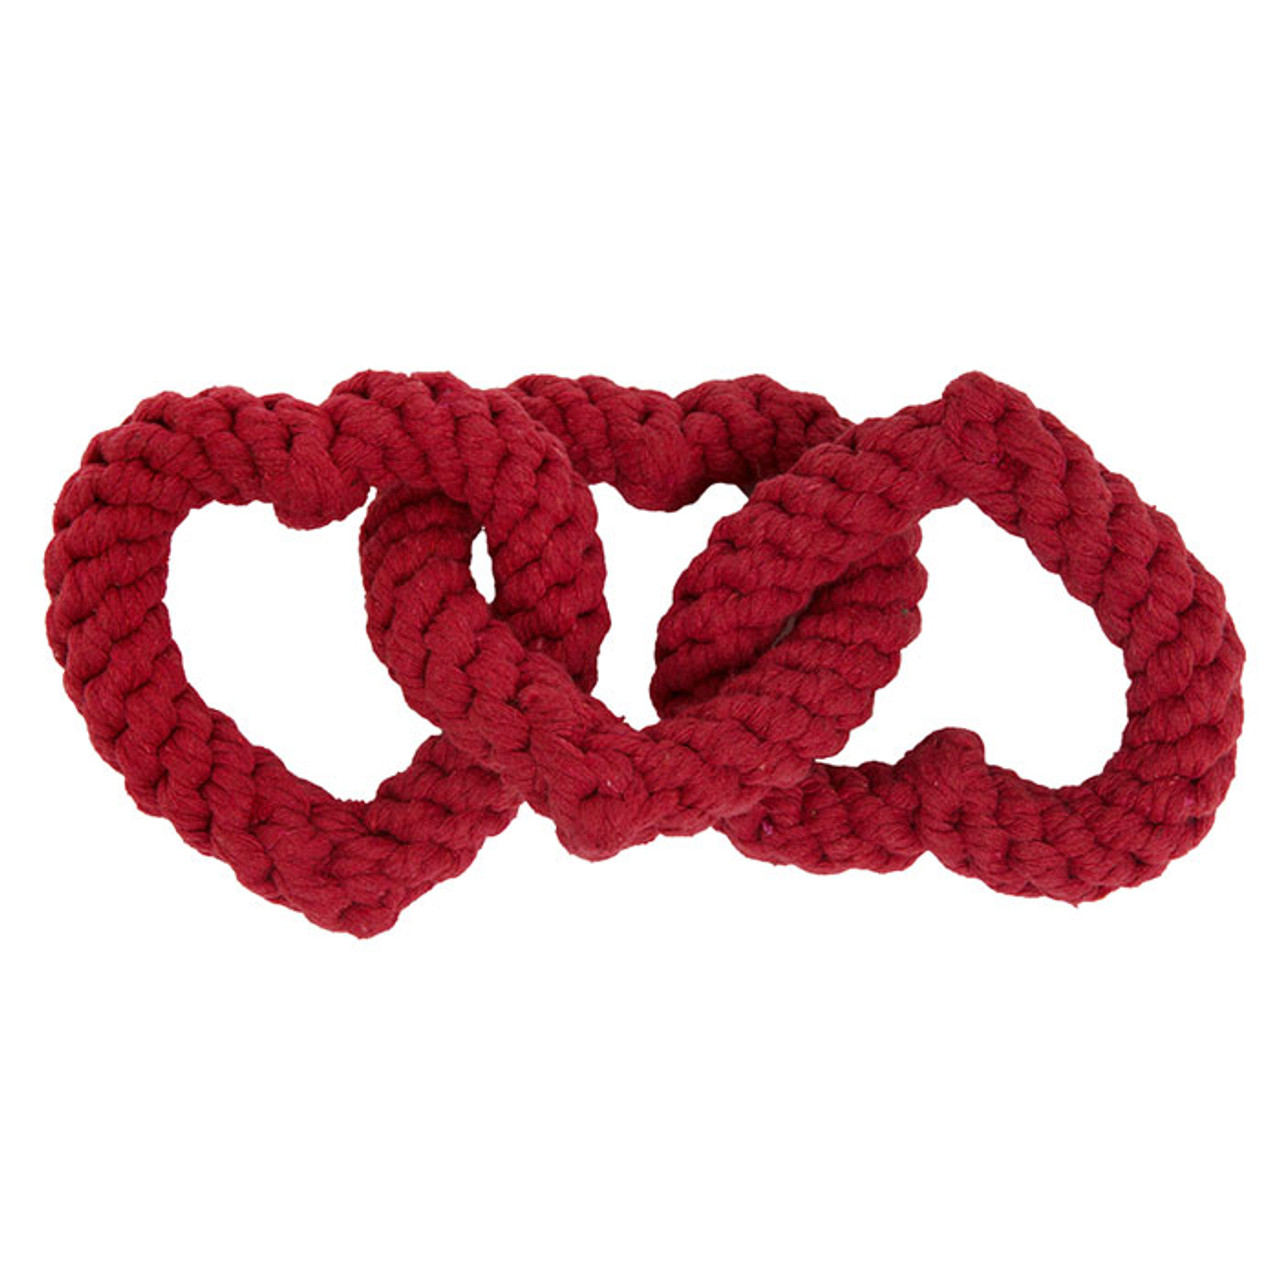 Chain of Hearts Rope Dog Toy